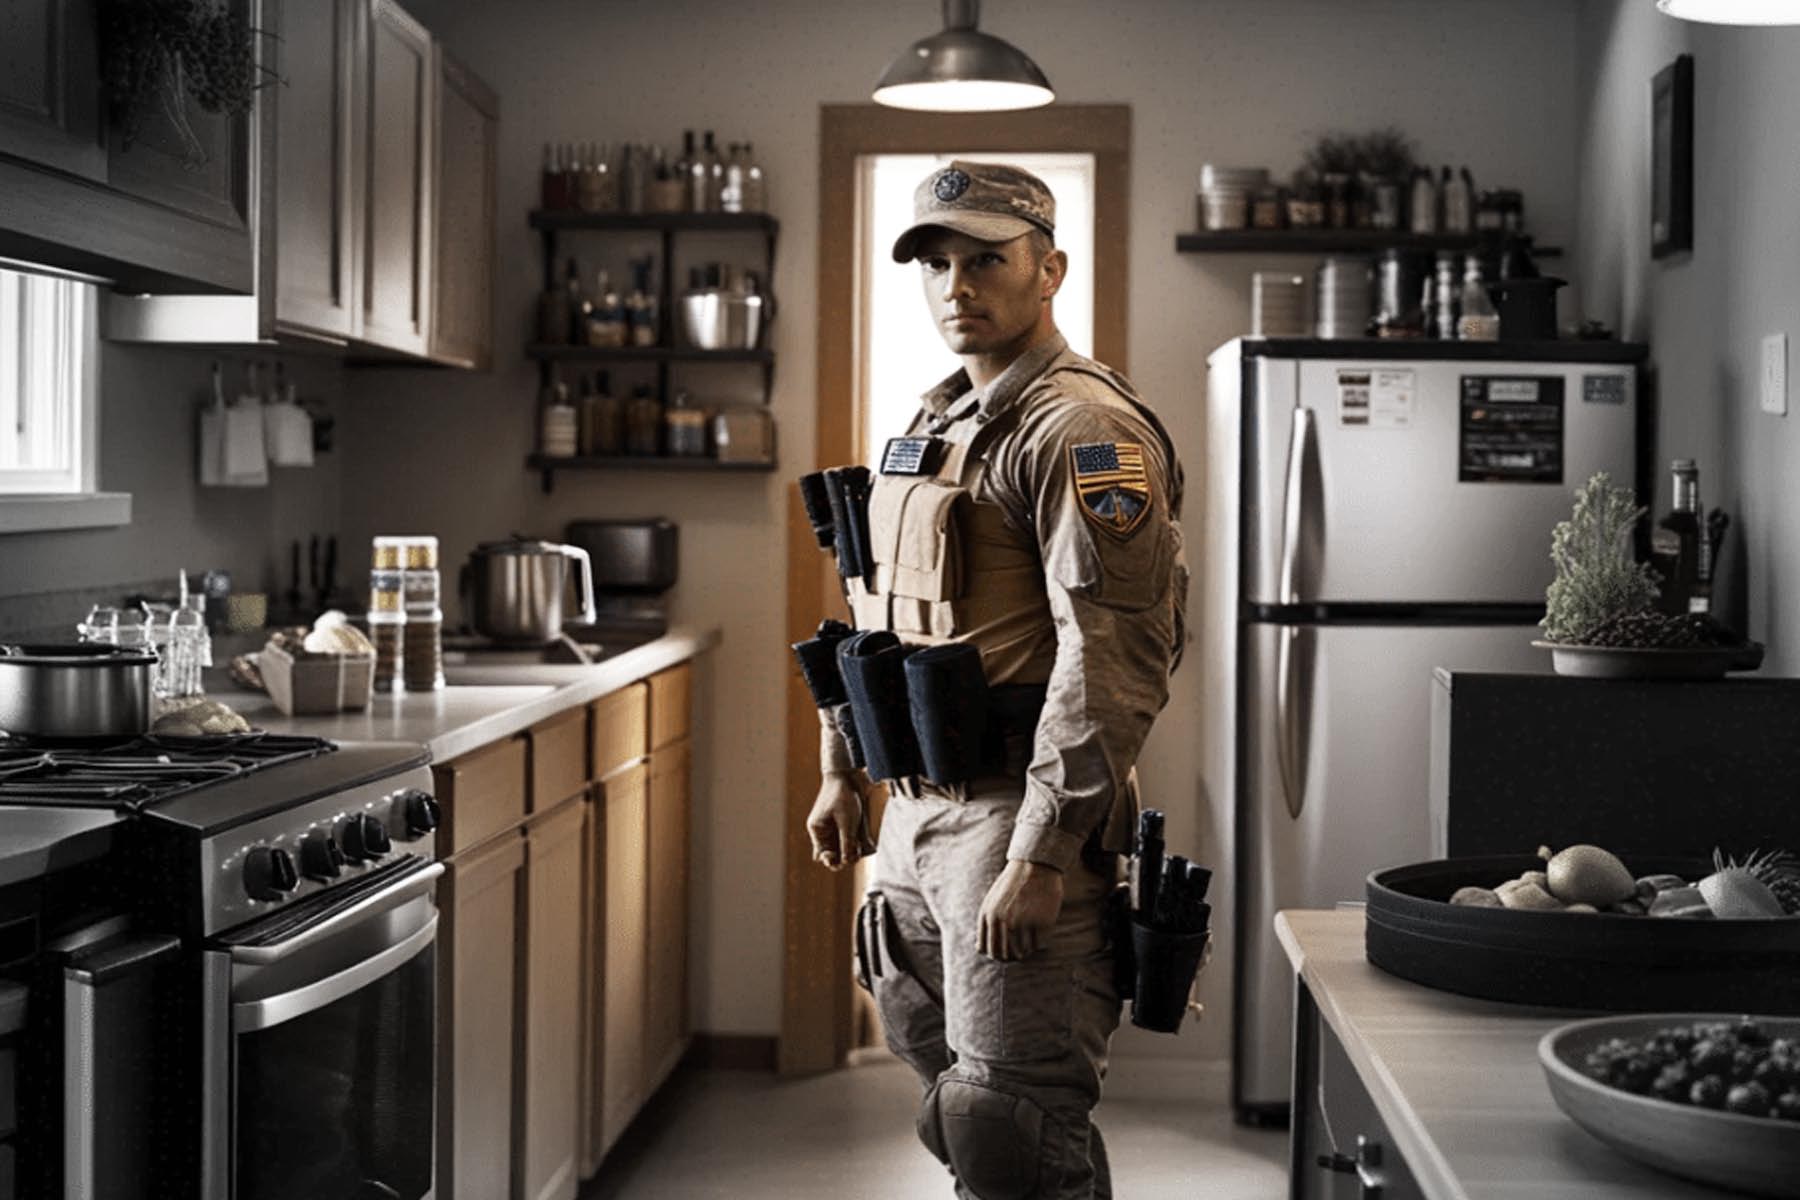 Appliance Repair Military Discount in Round Rock, TX: Special Savings for Our Armed Forces